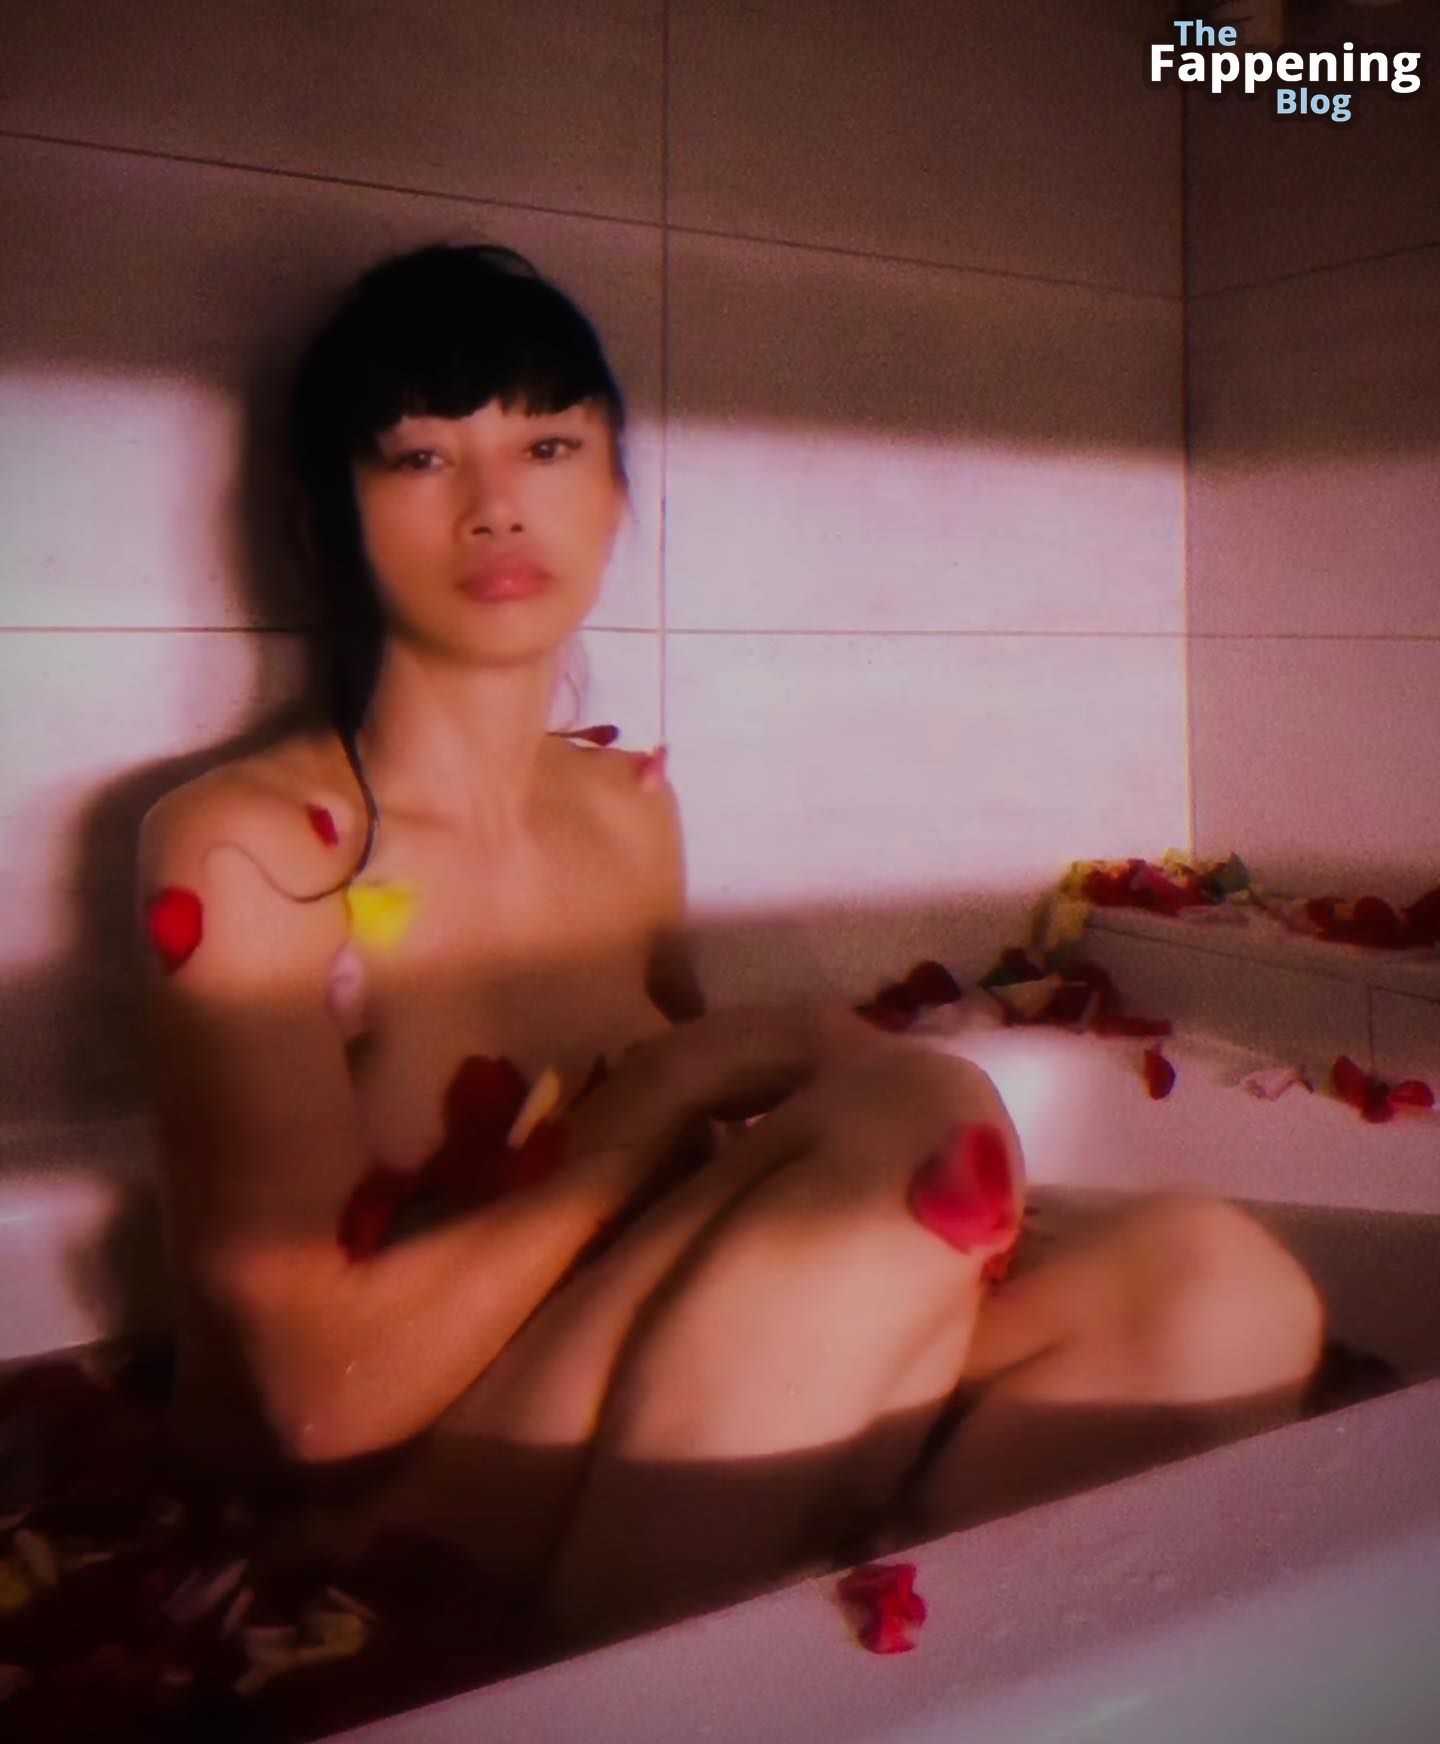 Bai-Ling-Nude-27-The-Fappening-Blog.jpg